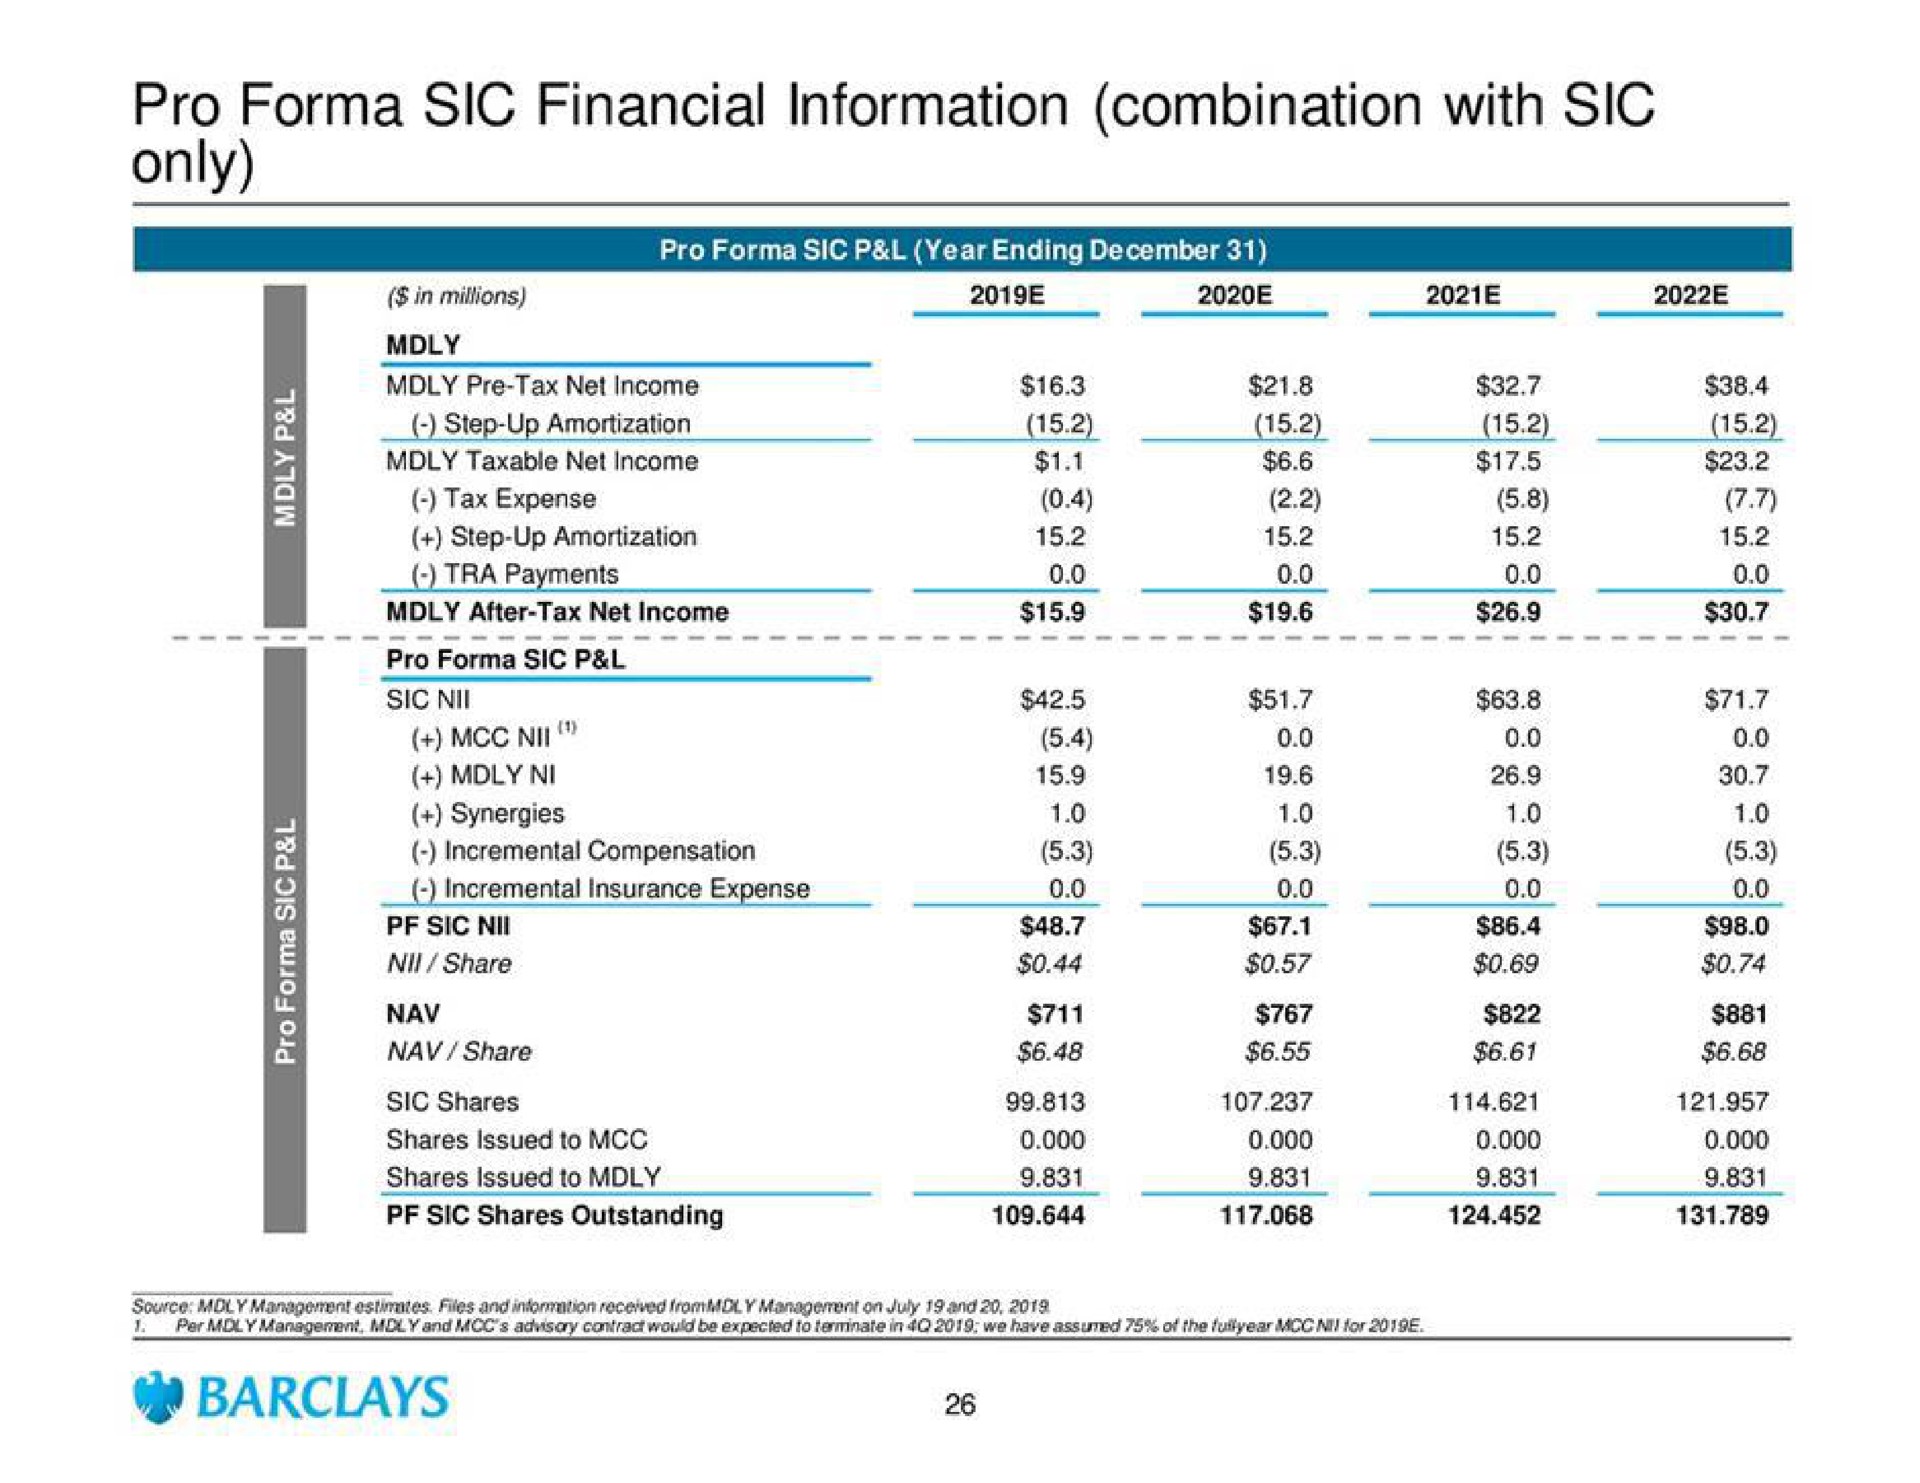 pro sic financial information combination with sic only | Barclays